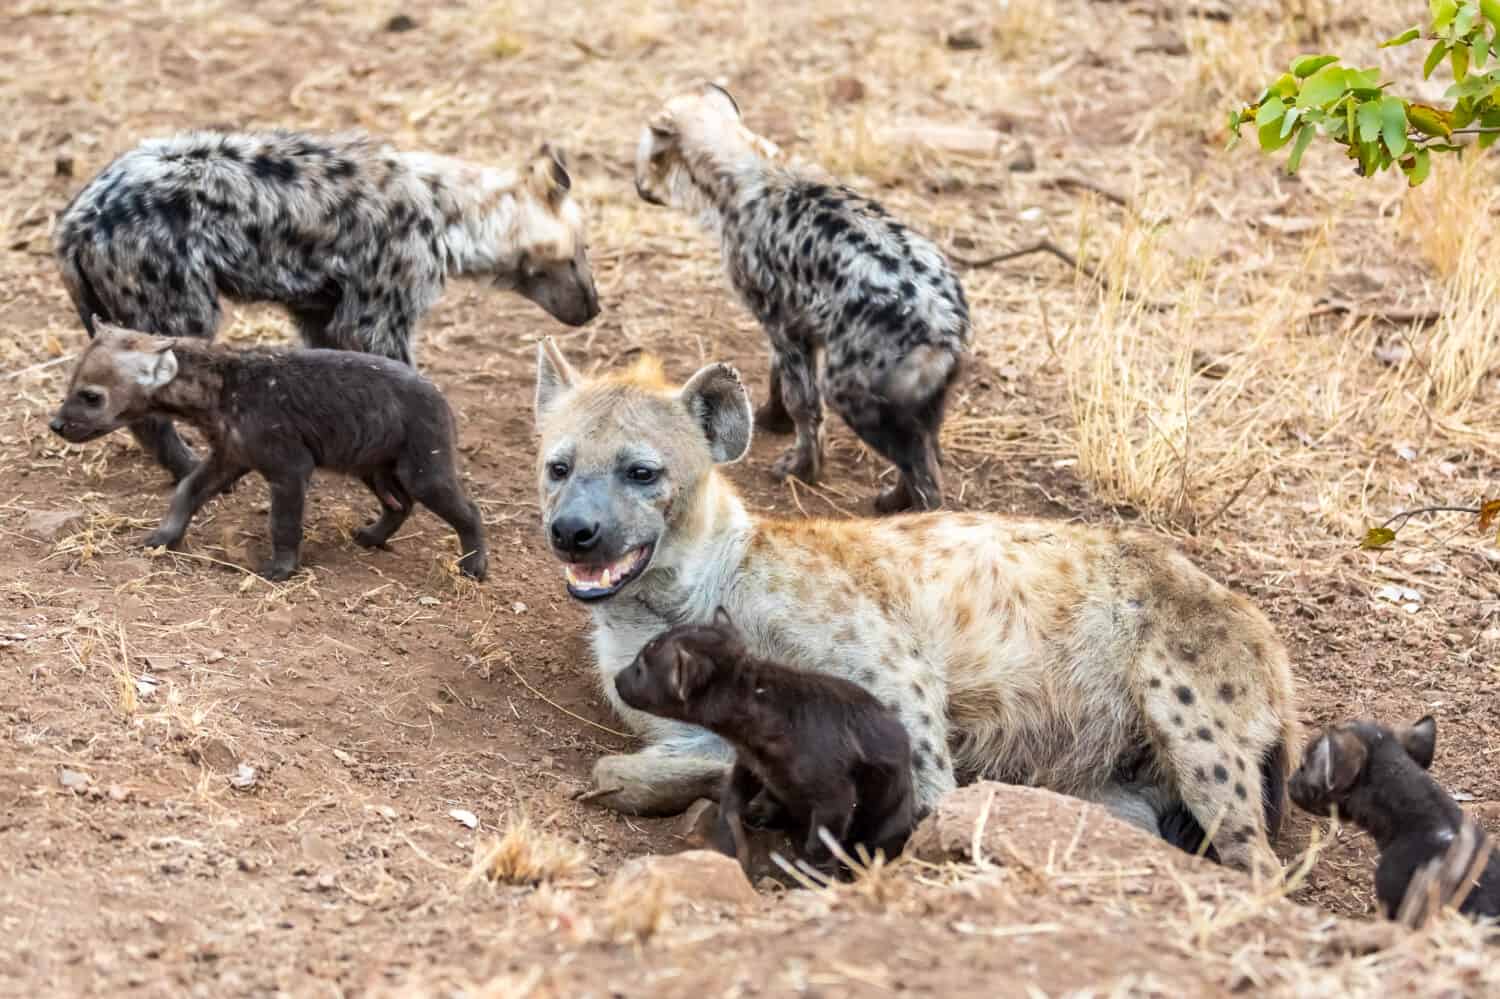 Hyena family in South Africa. Mother and Babys hyenas.